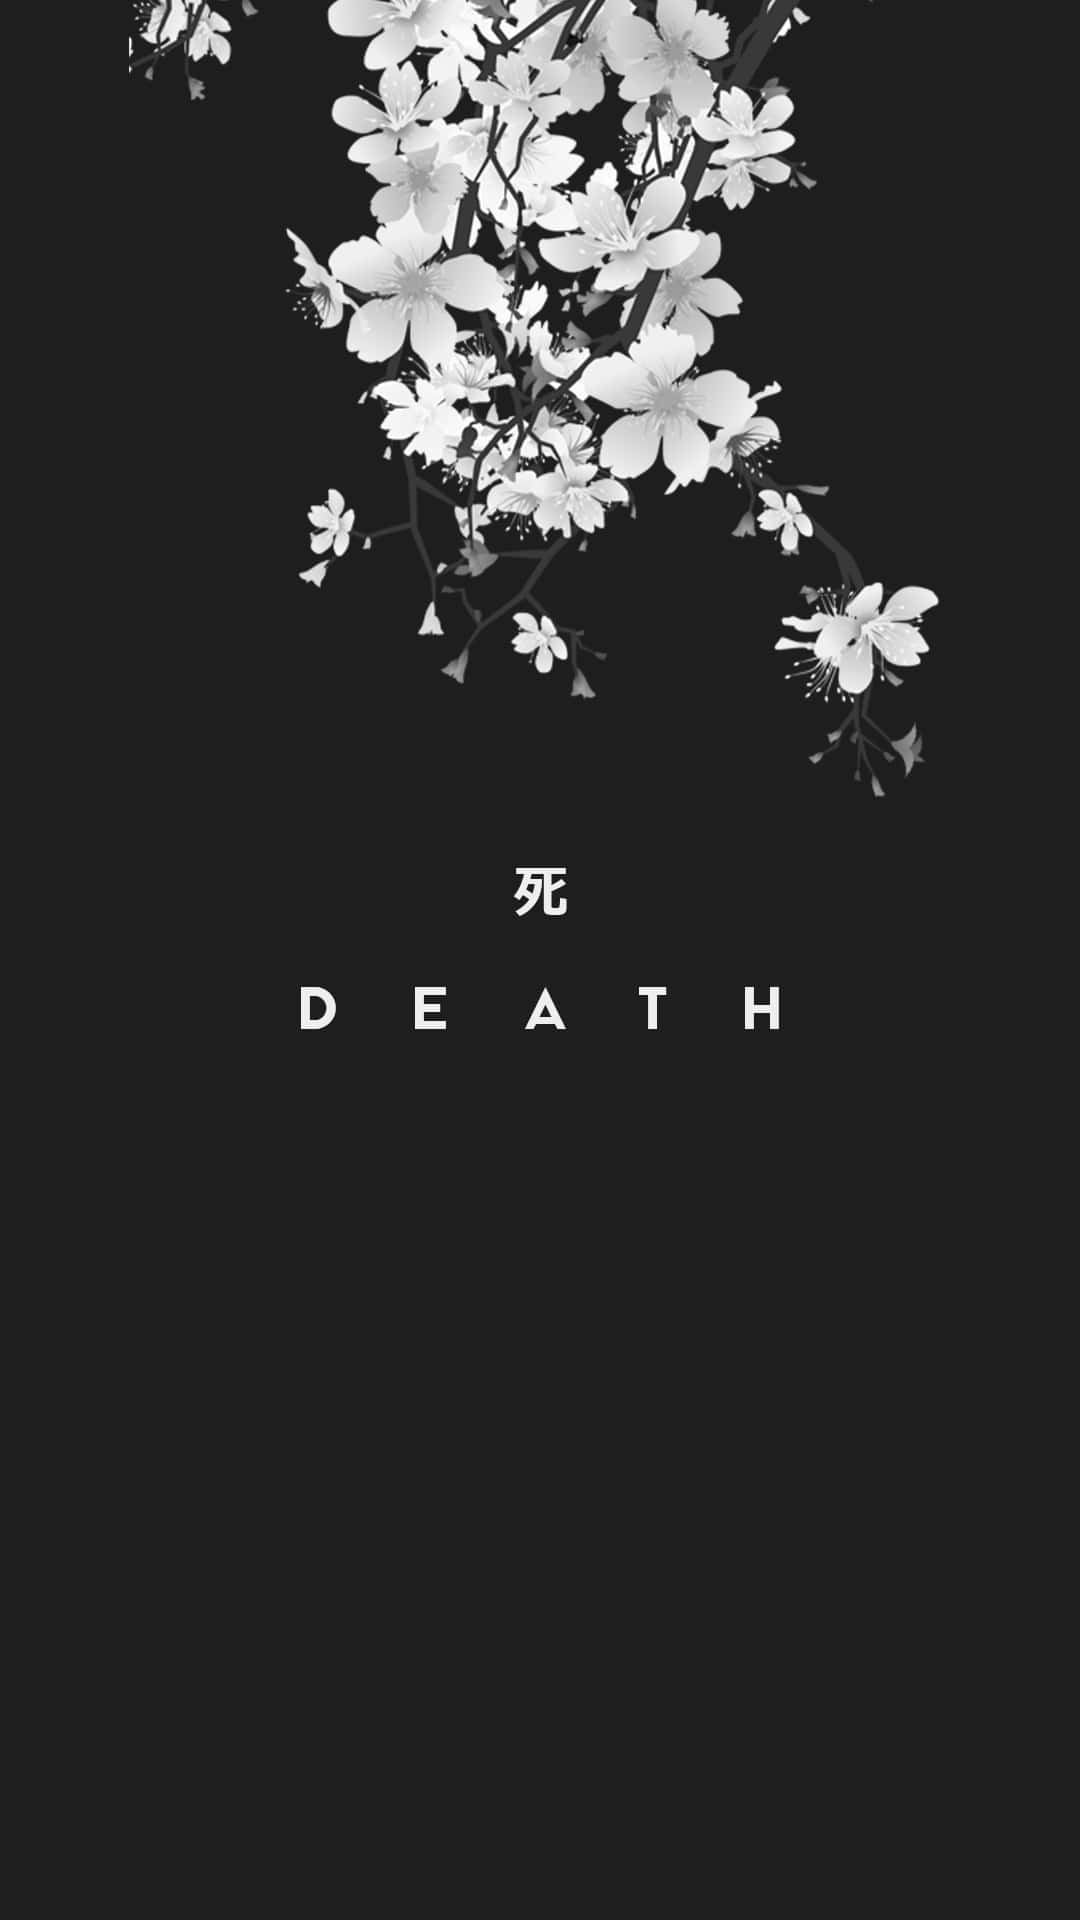 A Black And White Image Of A Flower With The Word Death Background